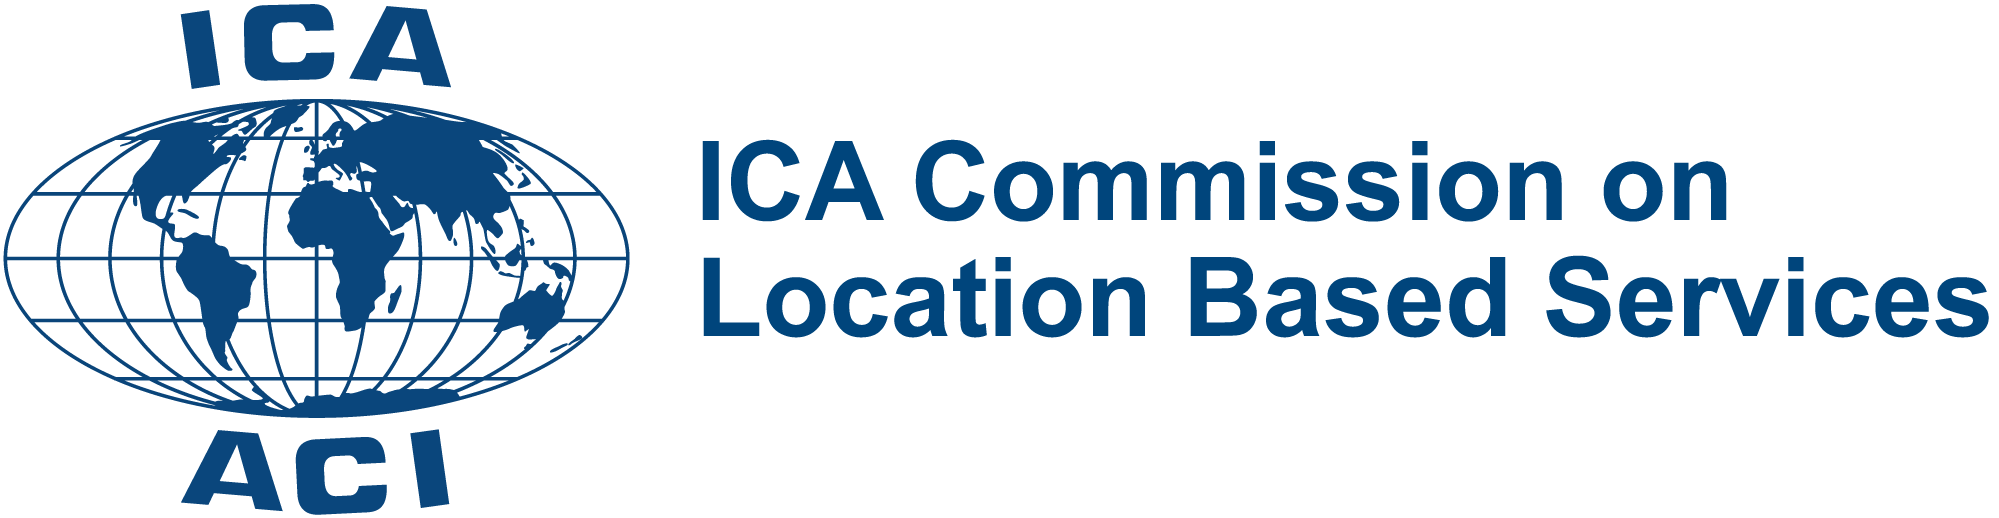 ICA Commission on Location Based Services